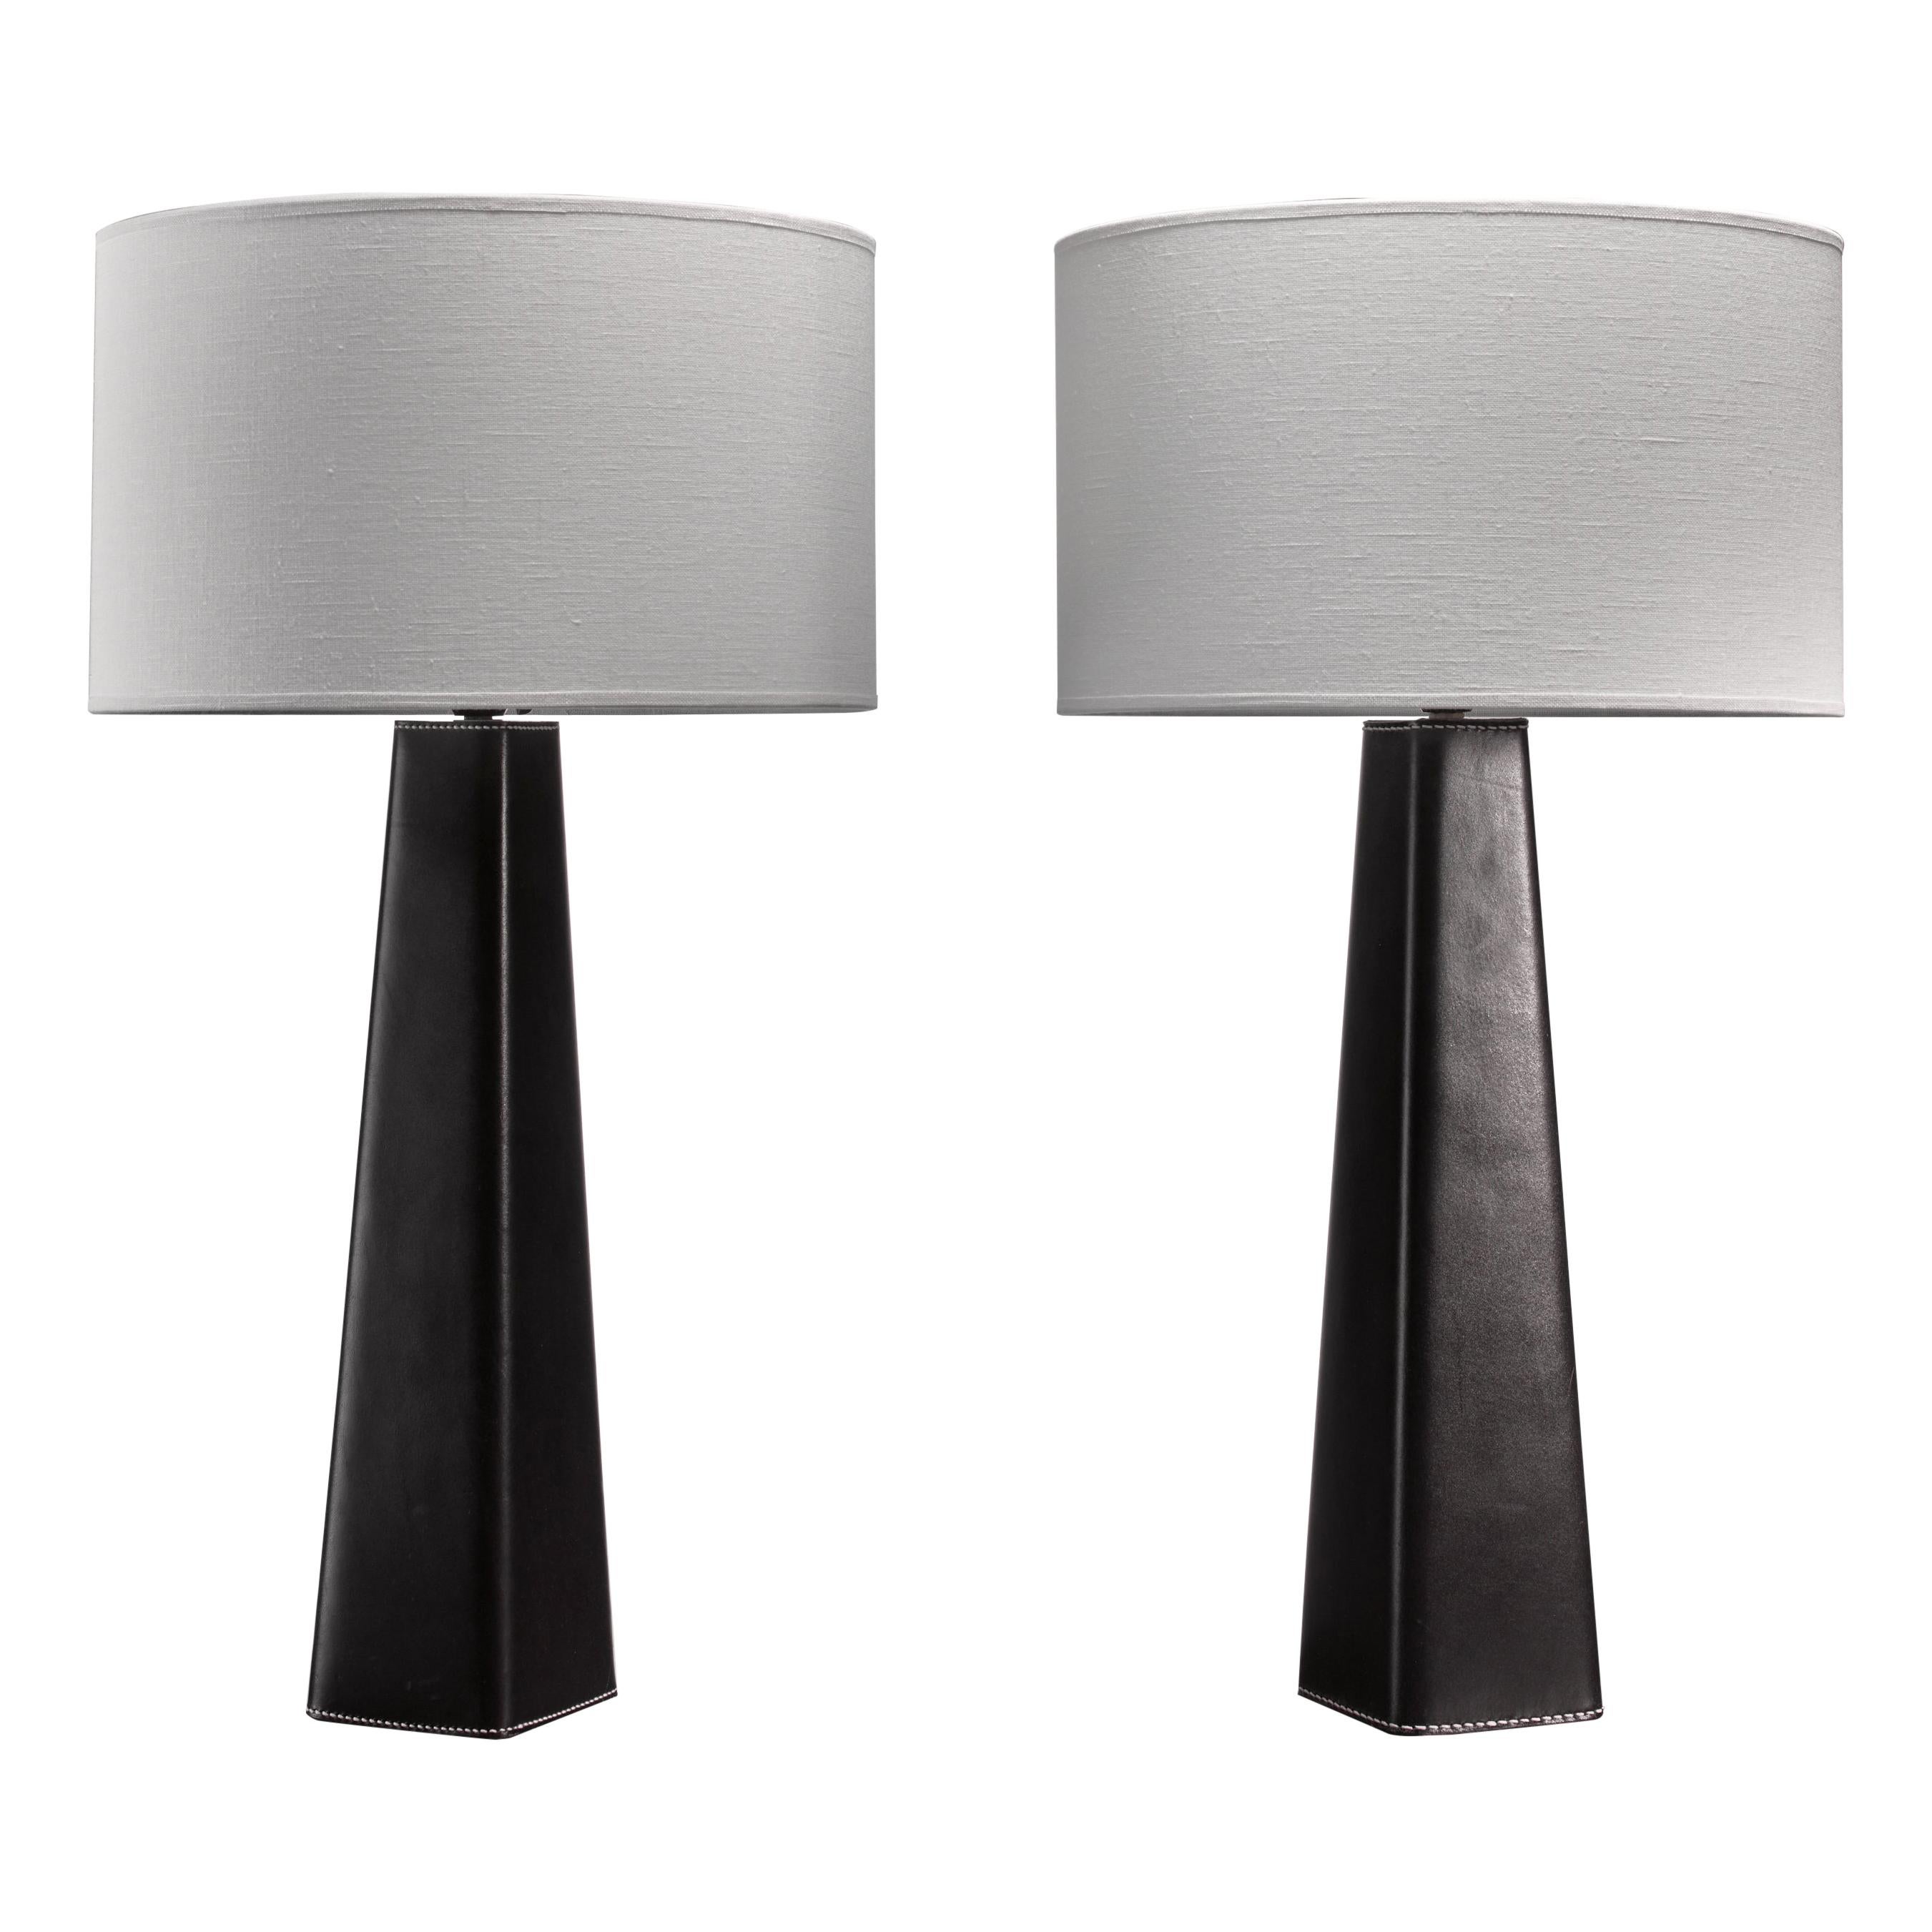 Pair of Scandinavian Modern Black Leather Clad Table Lamps